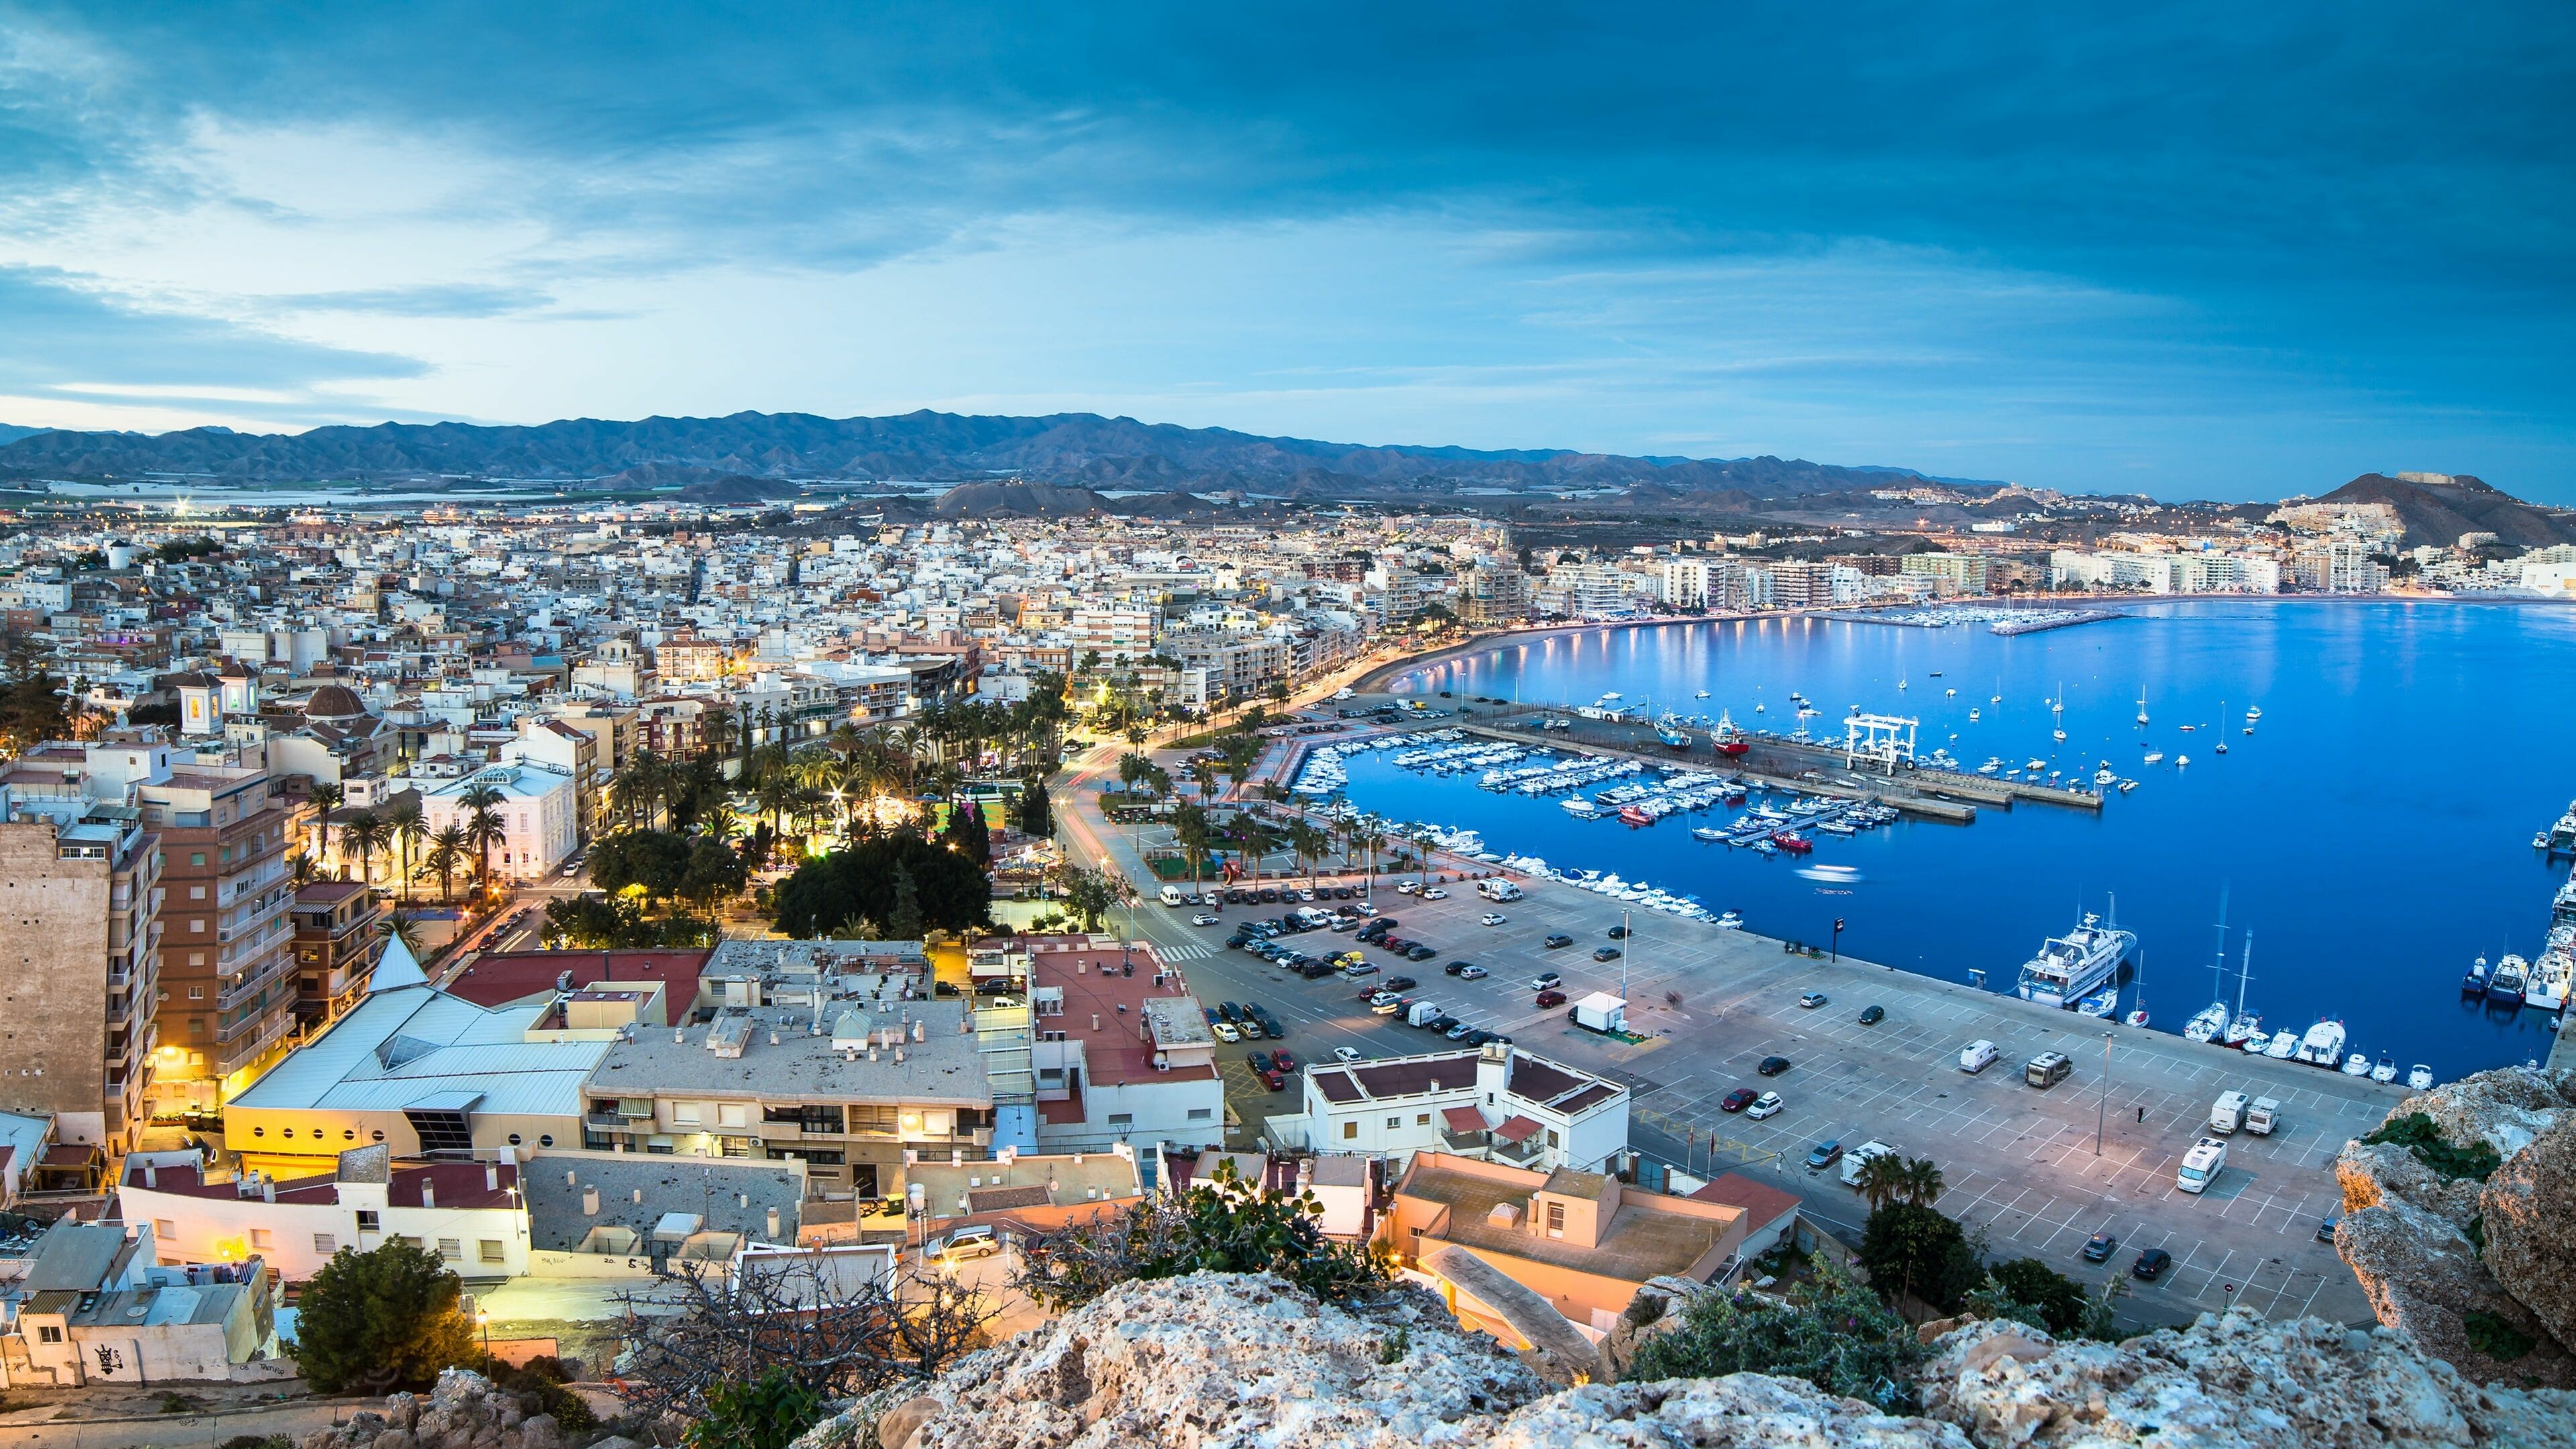 Spain: Murcia, Europe, Cityscape, The country's territory includes the Canary Islands in the Atlantic Ocean. 3840x2160 4K Background.